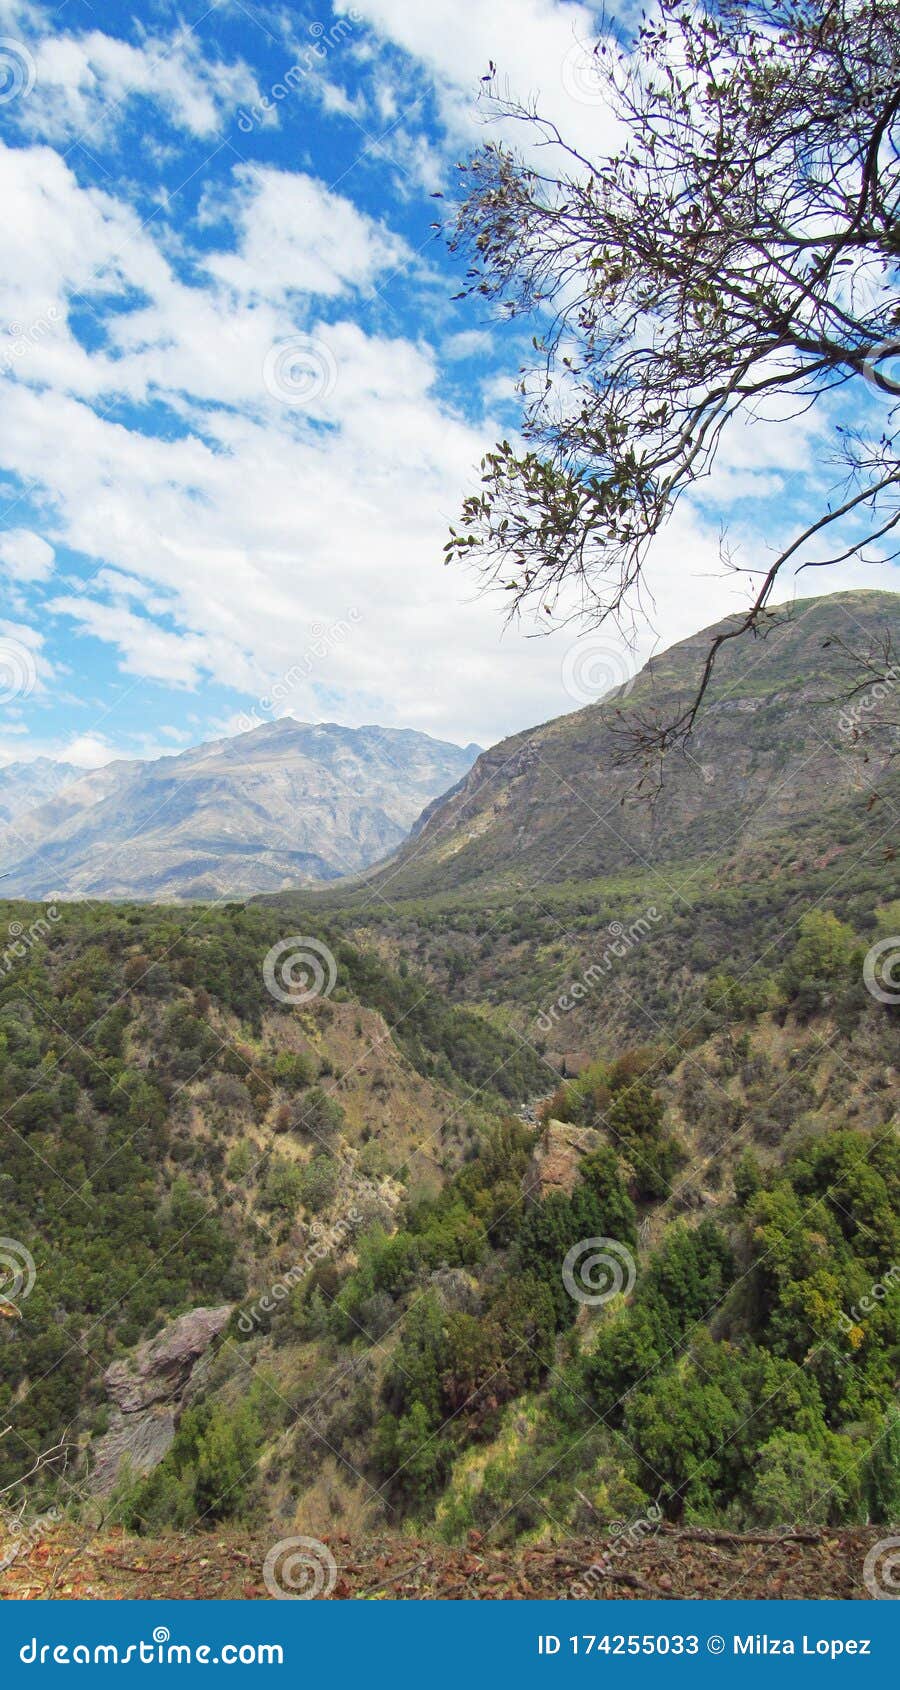 mountains in a nature reserve in chile